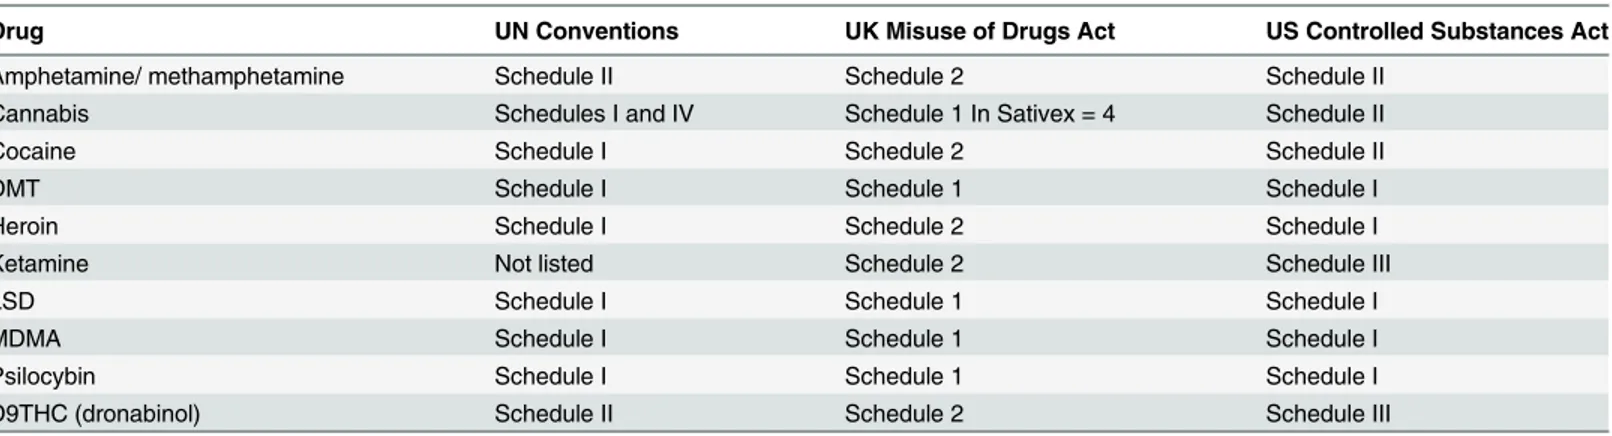 Table 1. The current status of drugs in the UN Conventions and UK and US drugs legislation.